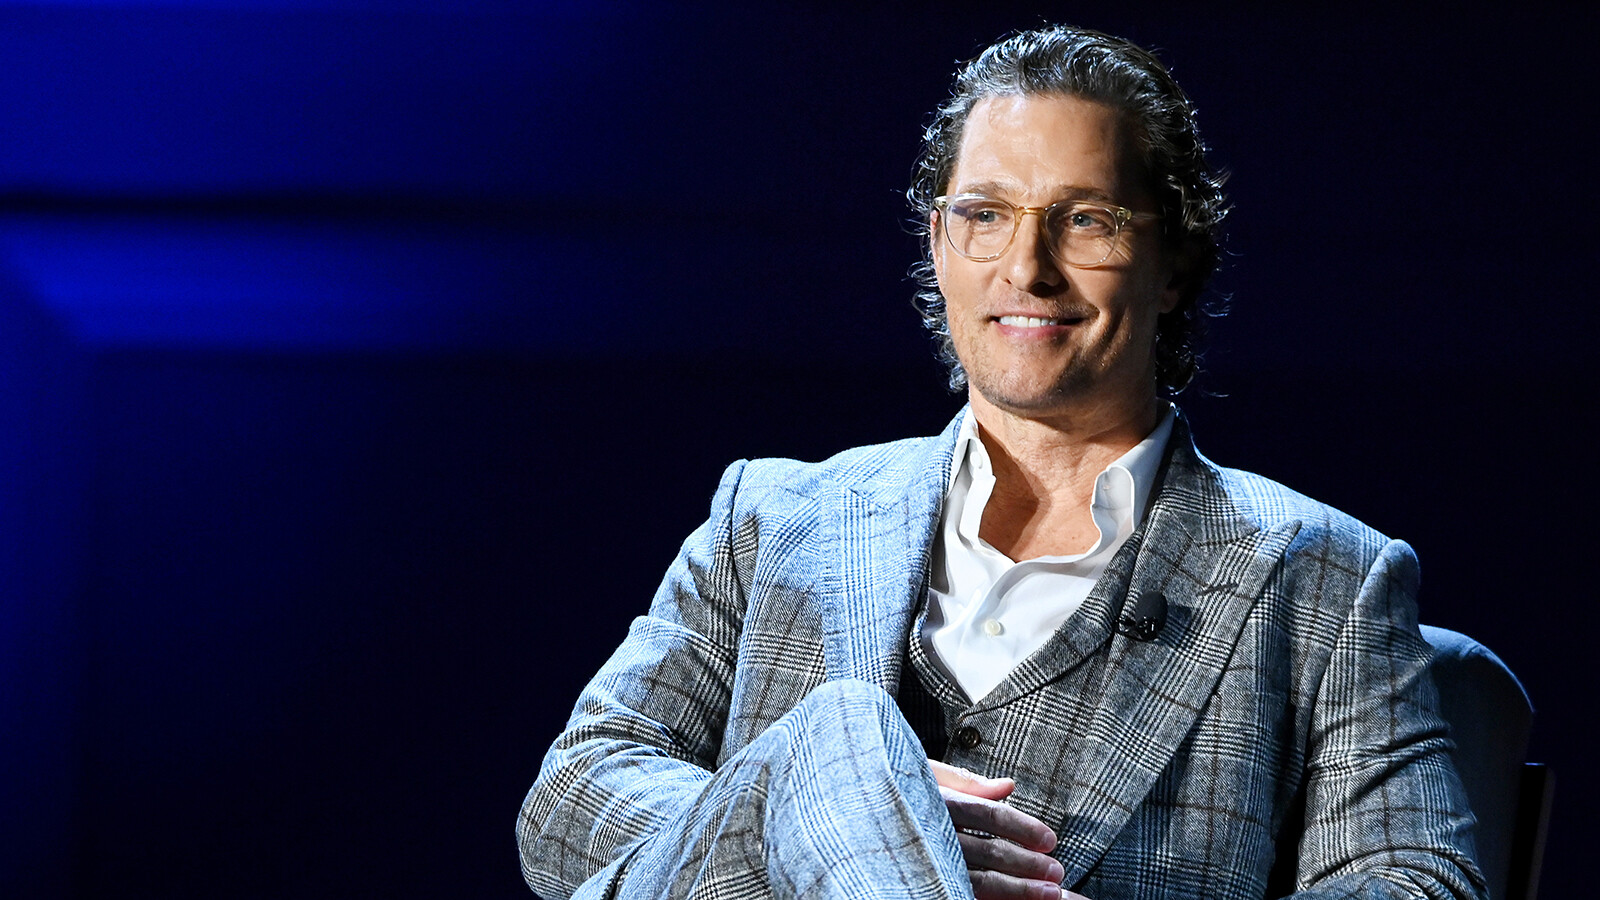 Actor Matthew McConaughey said his kids aren't vaccinated and that he's against mandating vaccines for children. McConaughey is shown here at Carnegie Hall on February 29